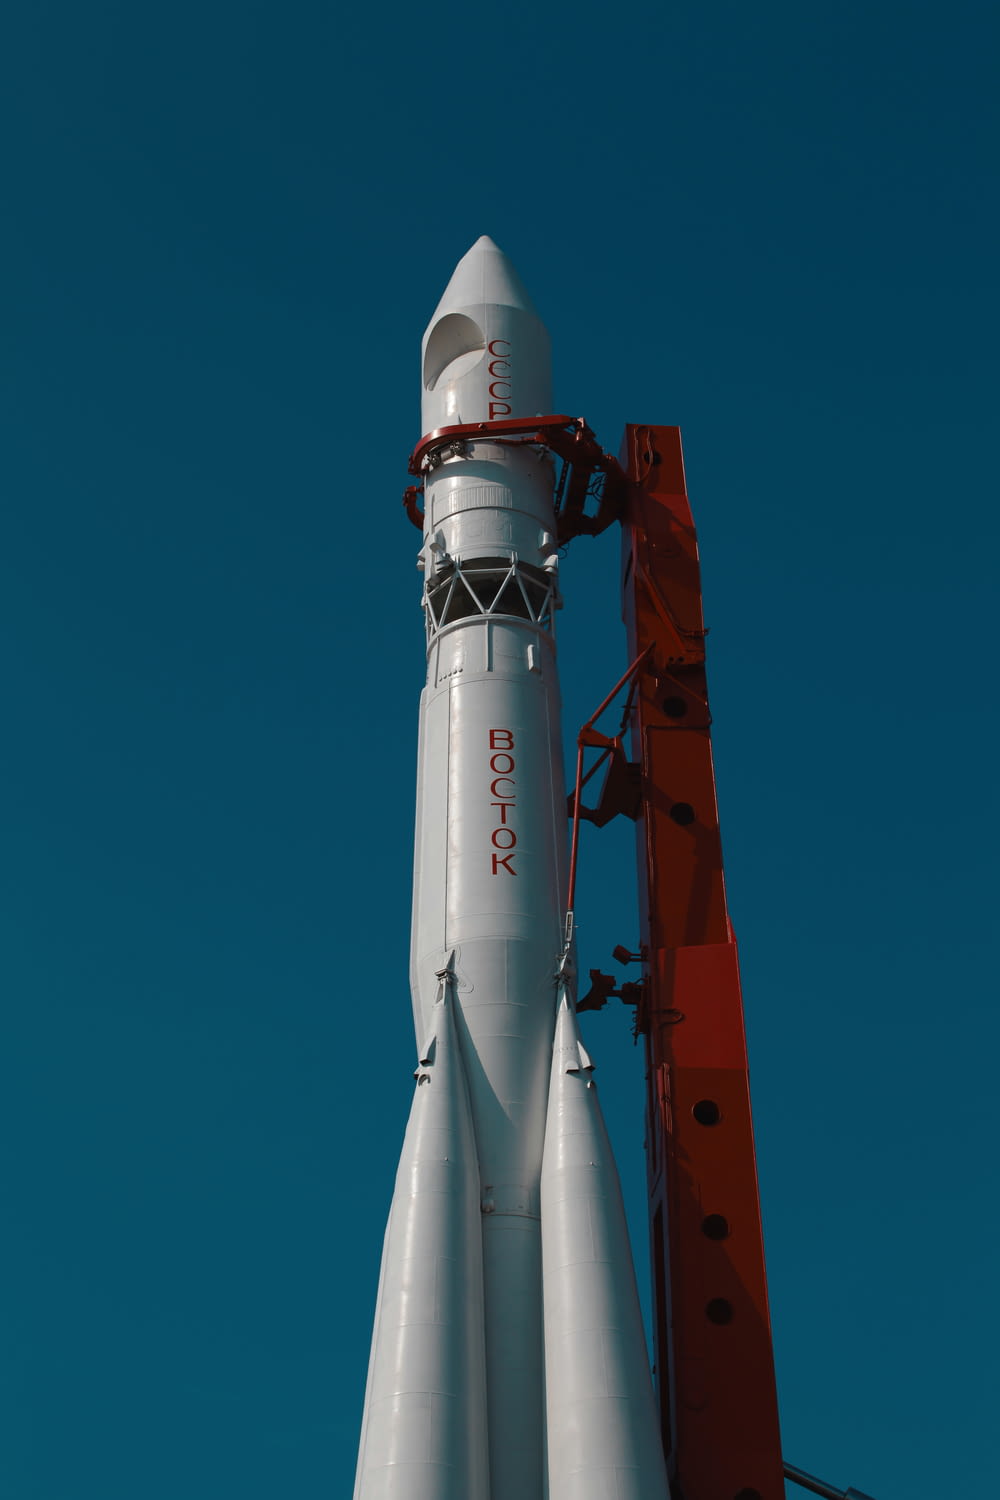 a rocket on a launch pad